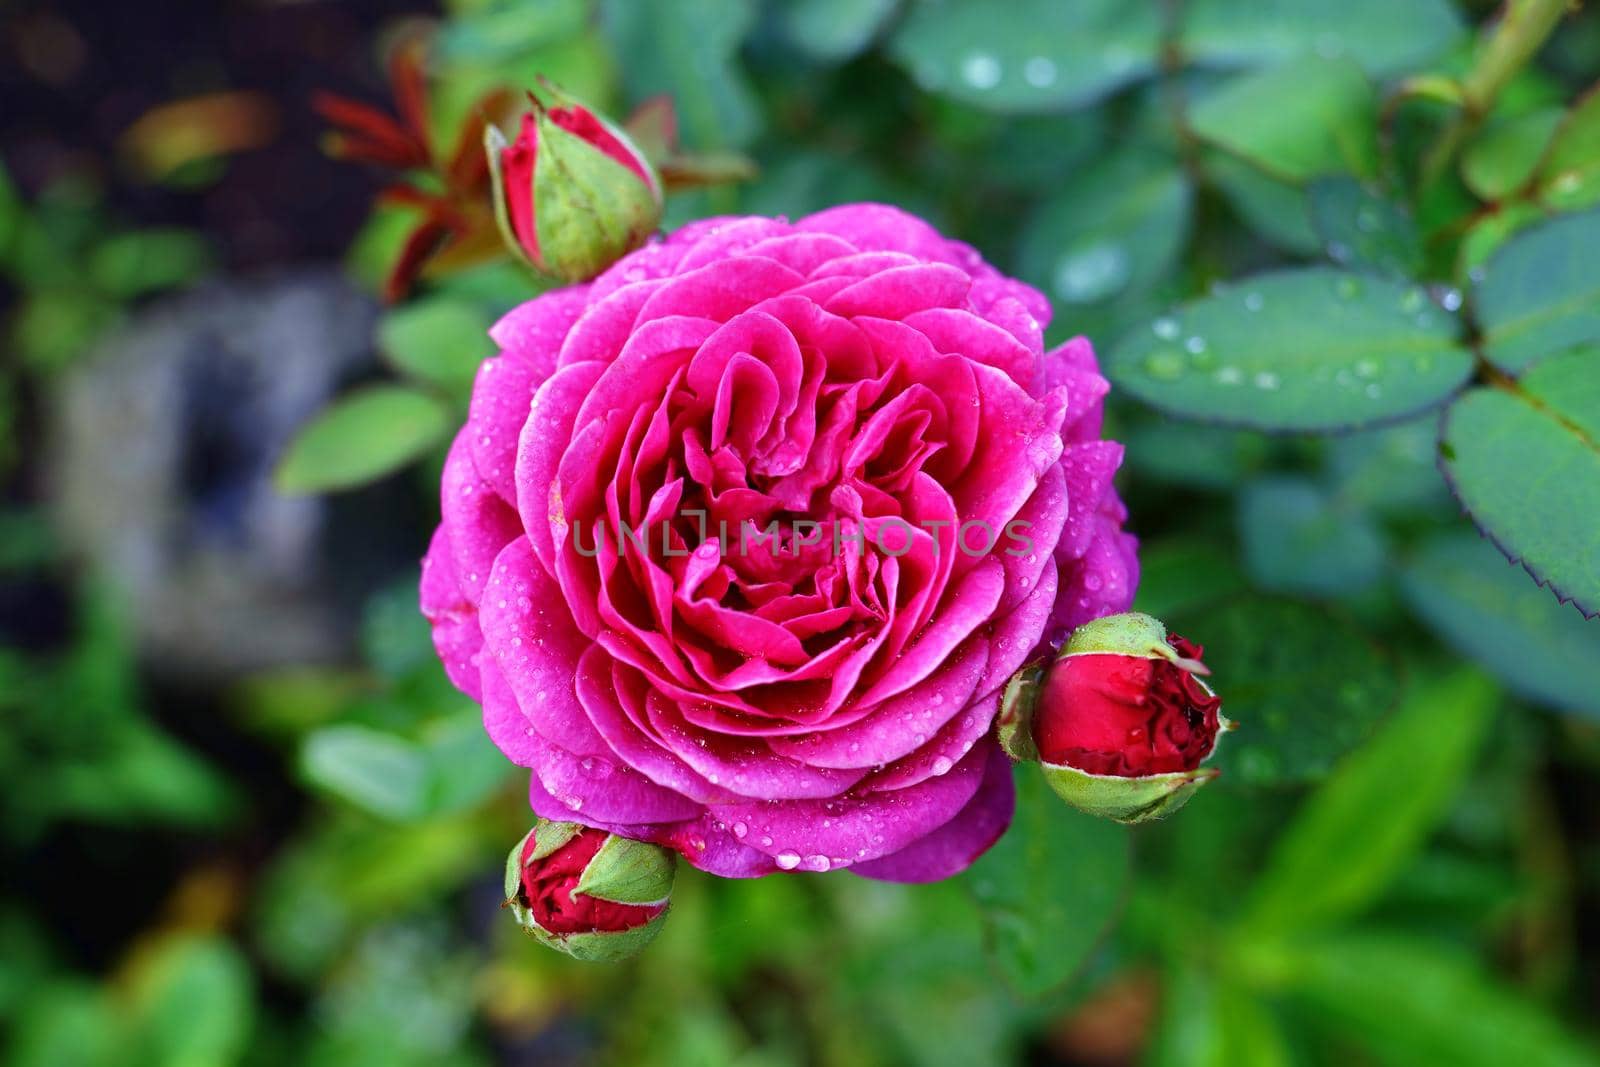 Pink garden rose with bud in natural green environment outdoors. Close-up view